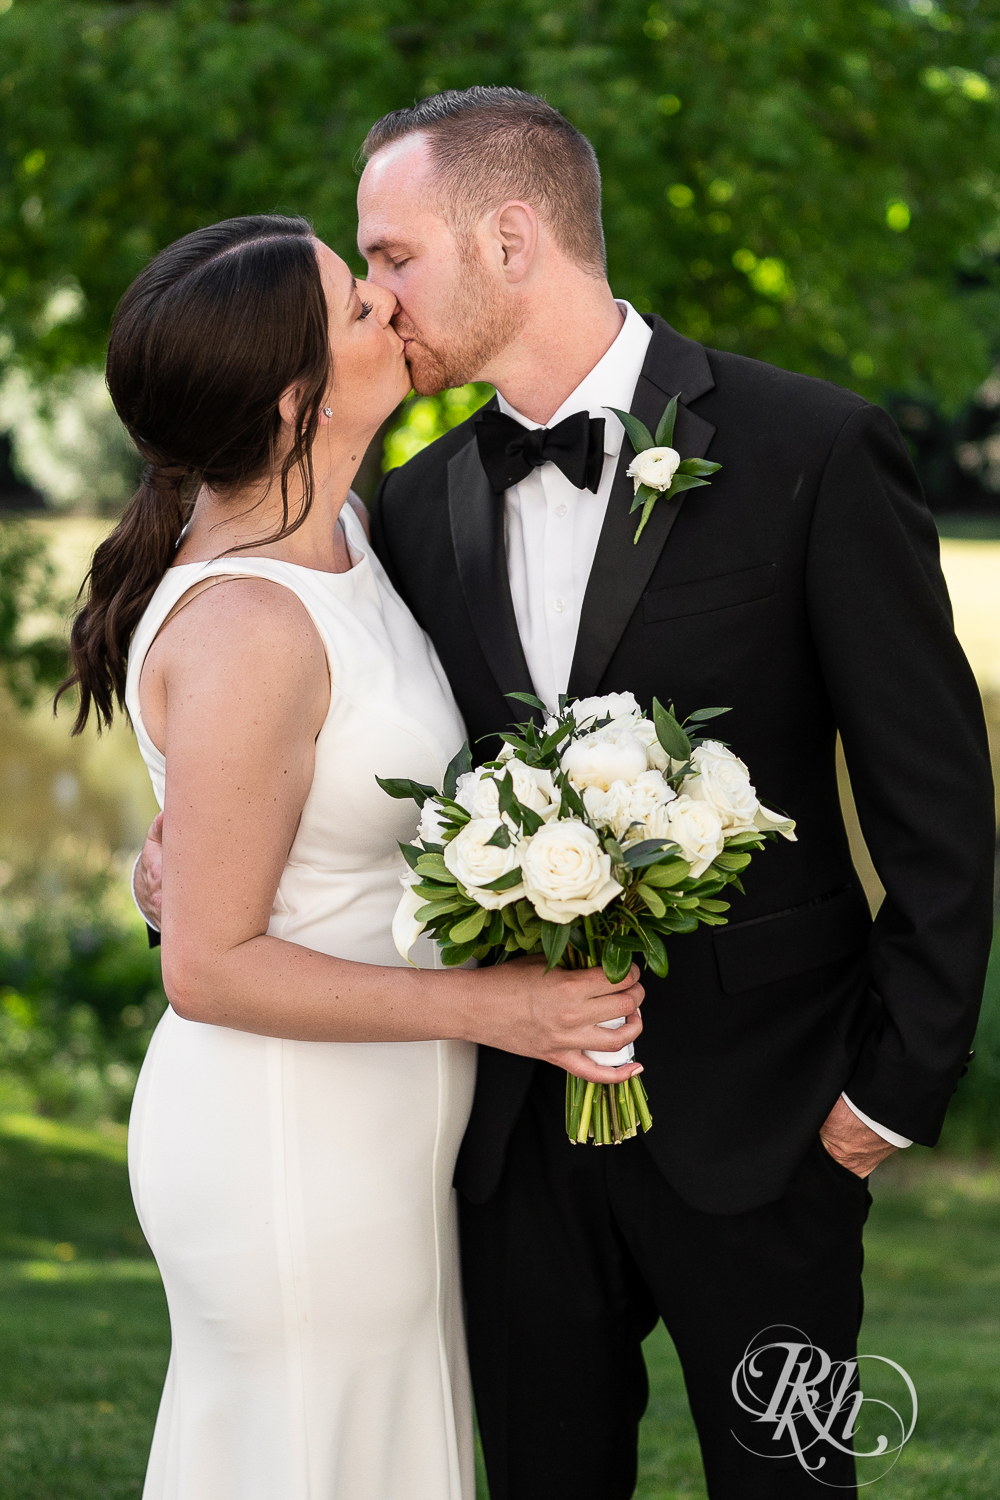 Bride and groom kiss at home wedding in Eagan, Minnesota.